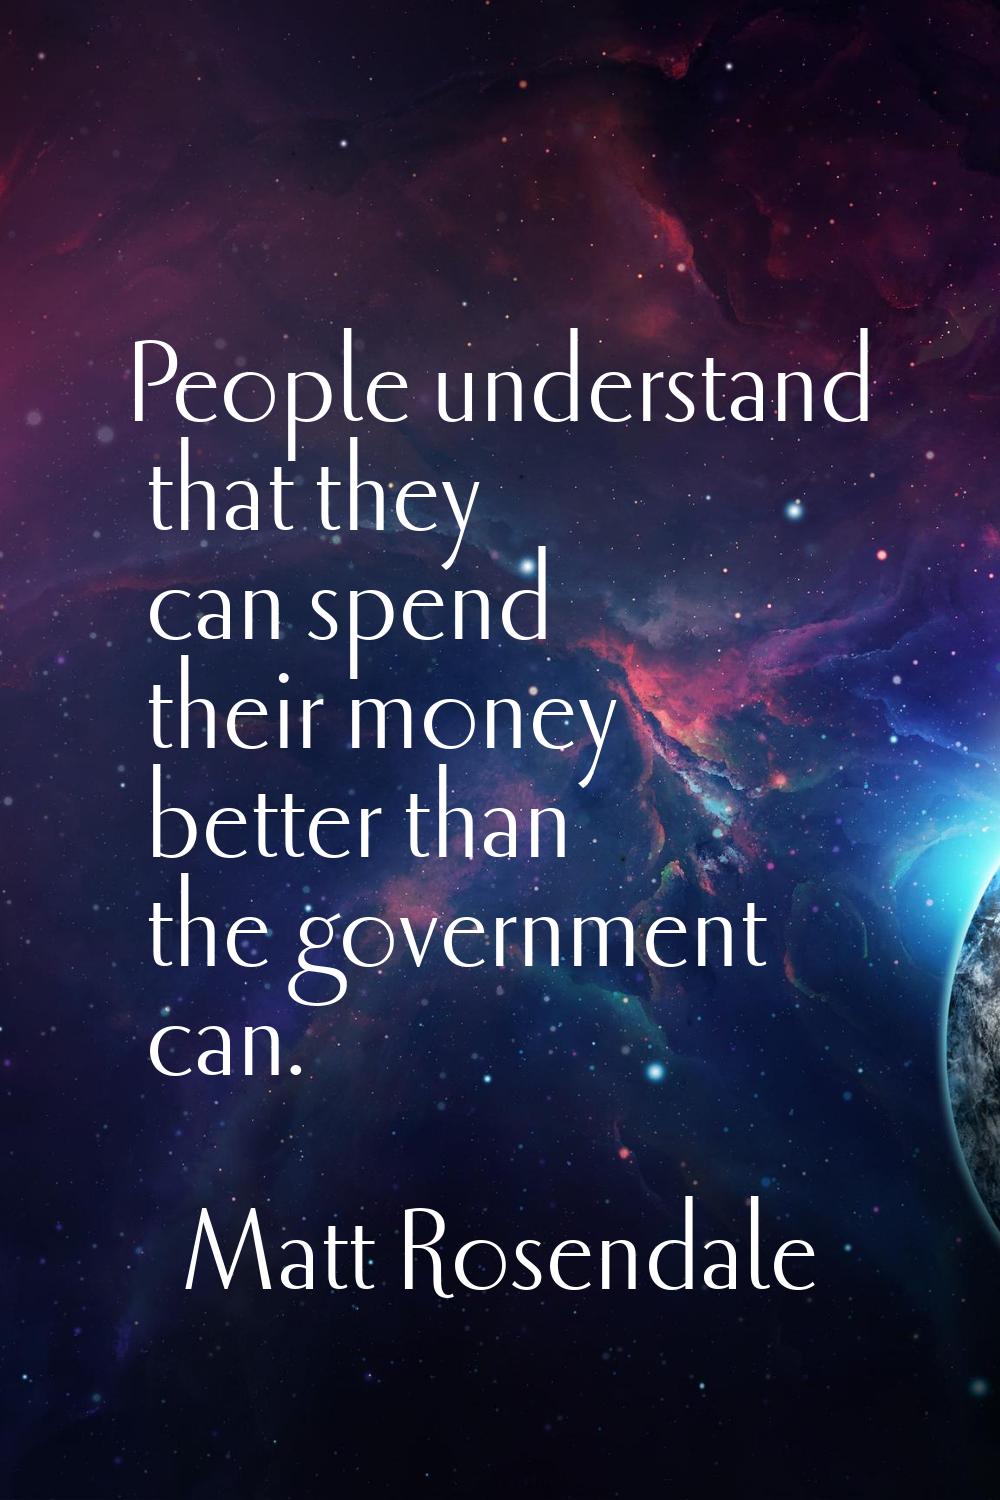 People understand that they can spend their money better than the government can.